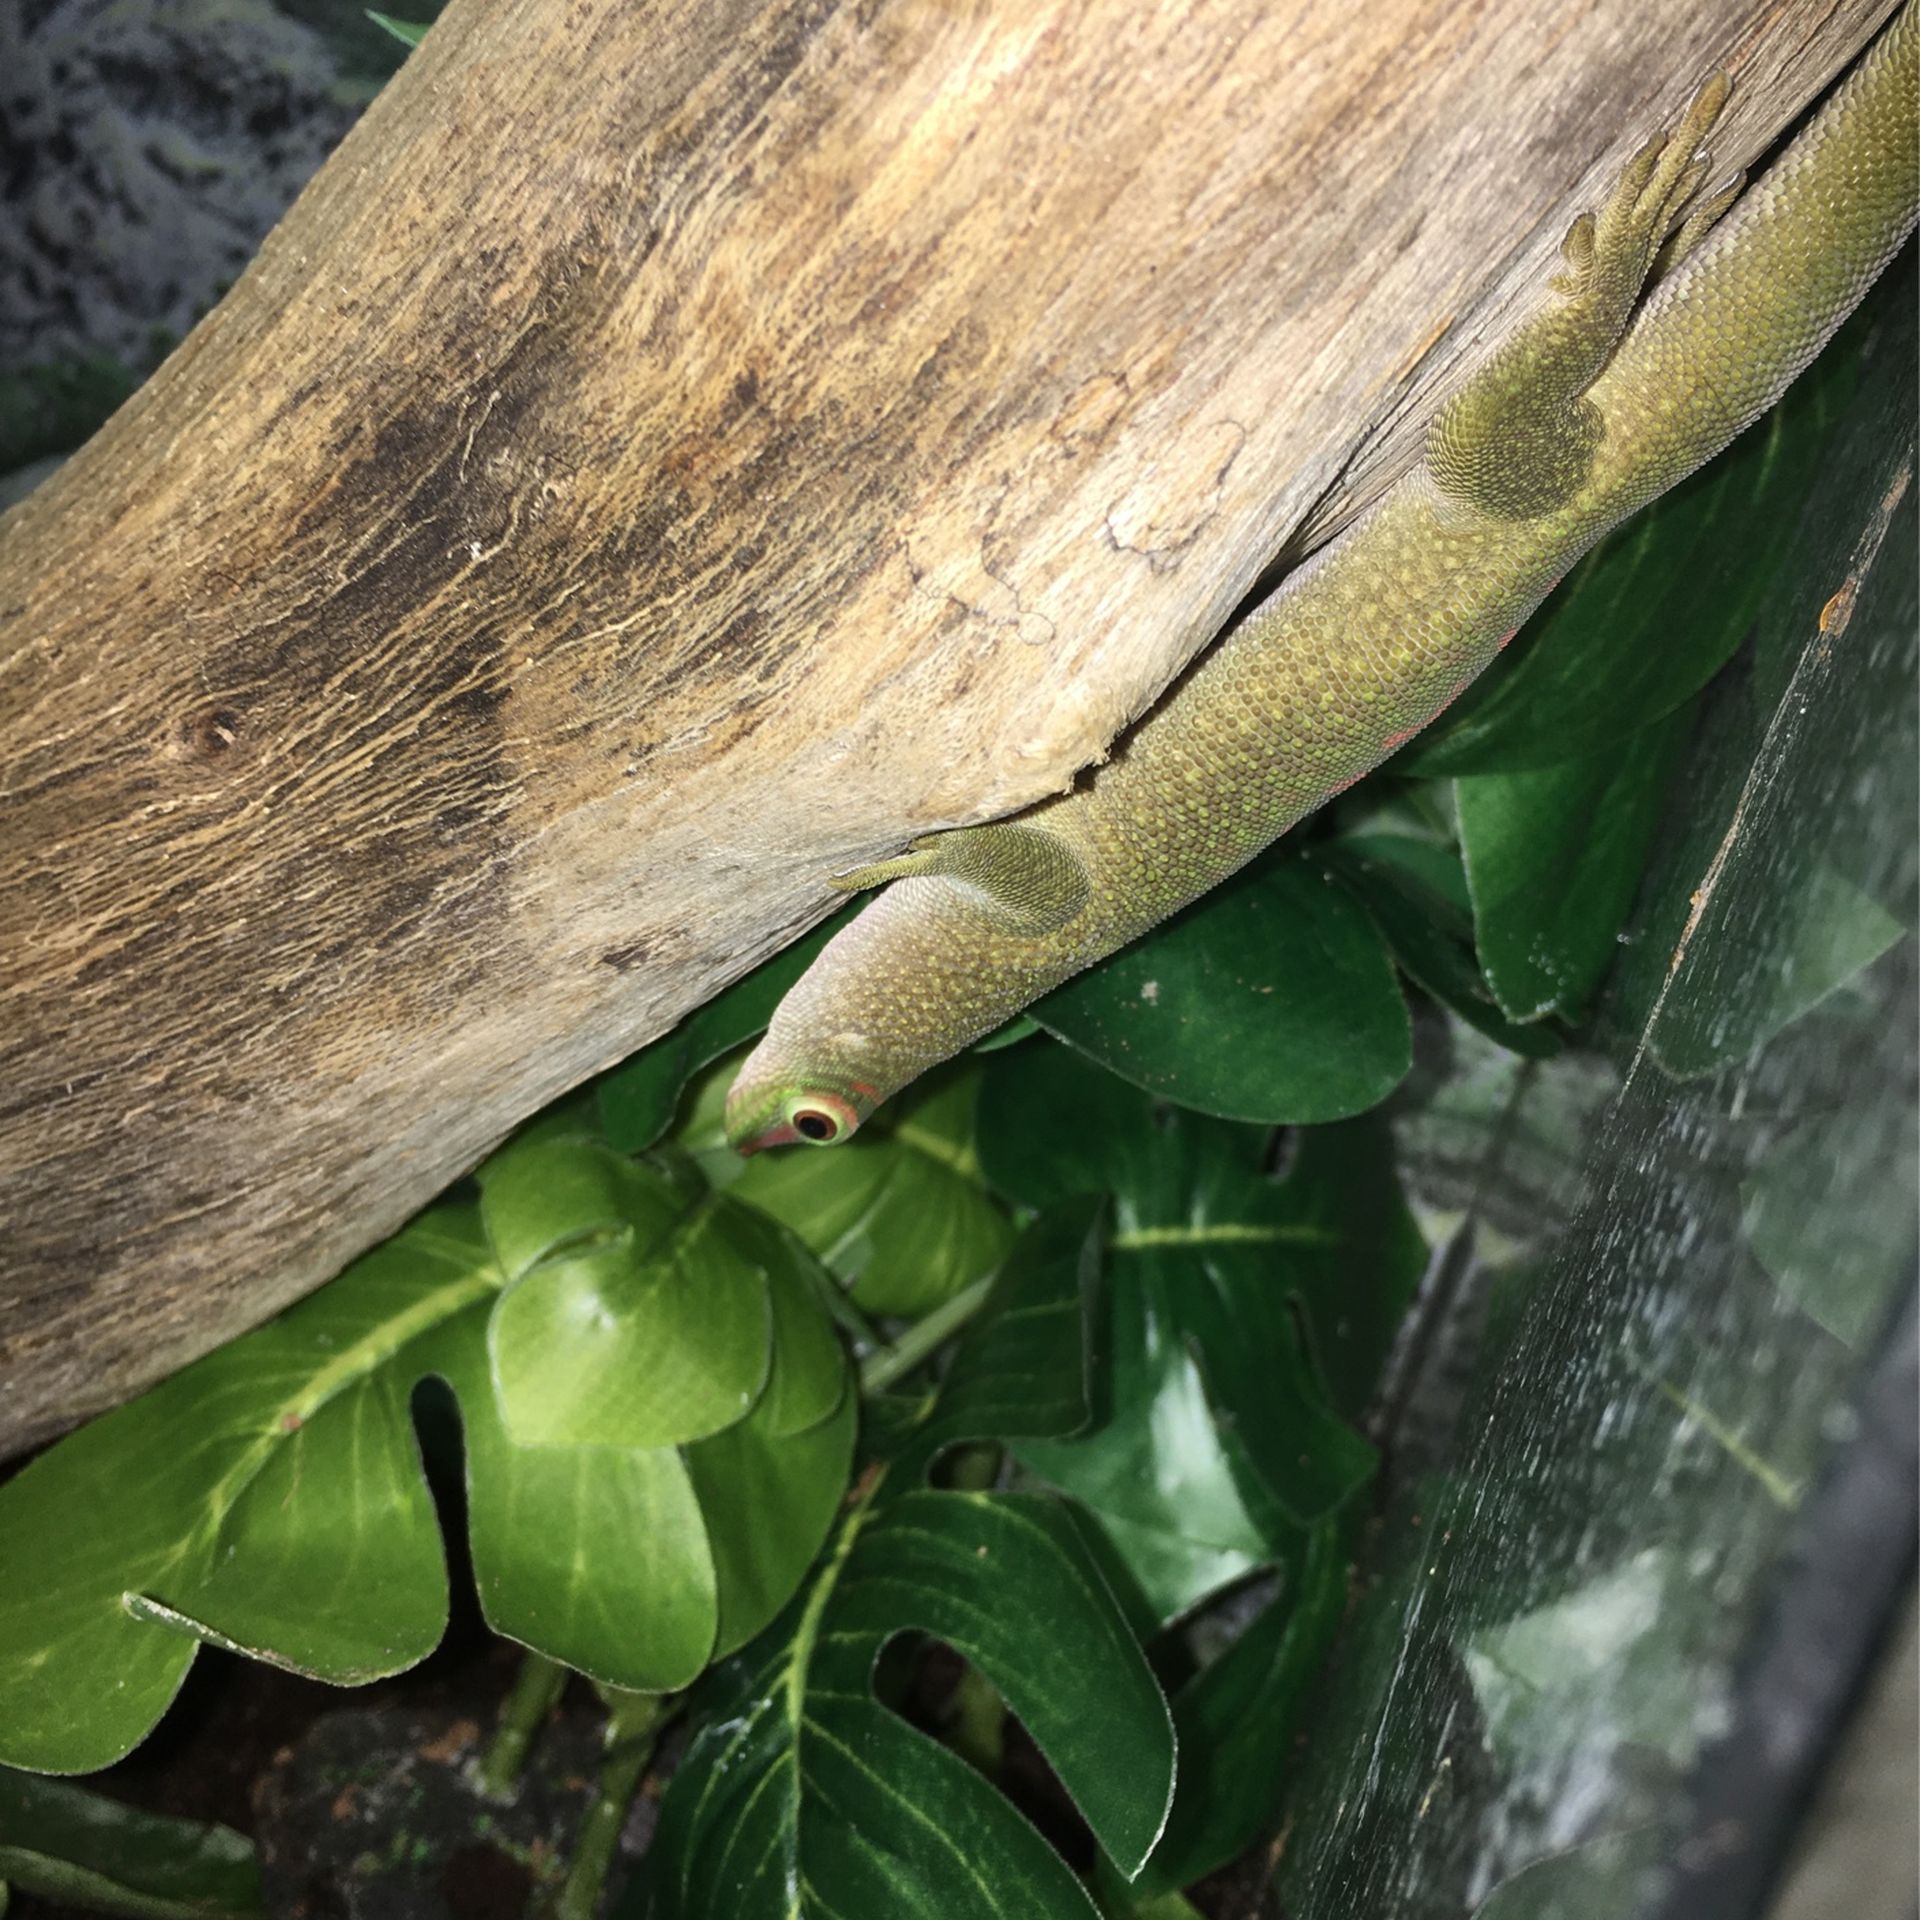 Toy Giant Day gecko Look below in Description For More Details (Acepting Trades Also)